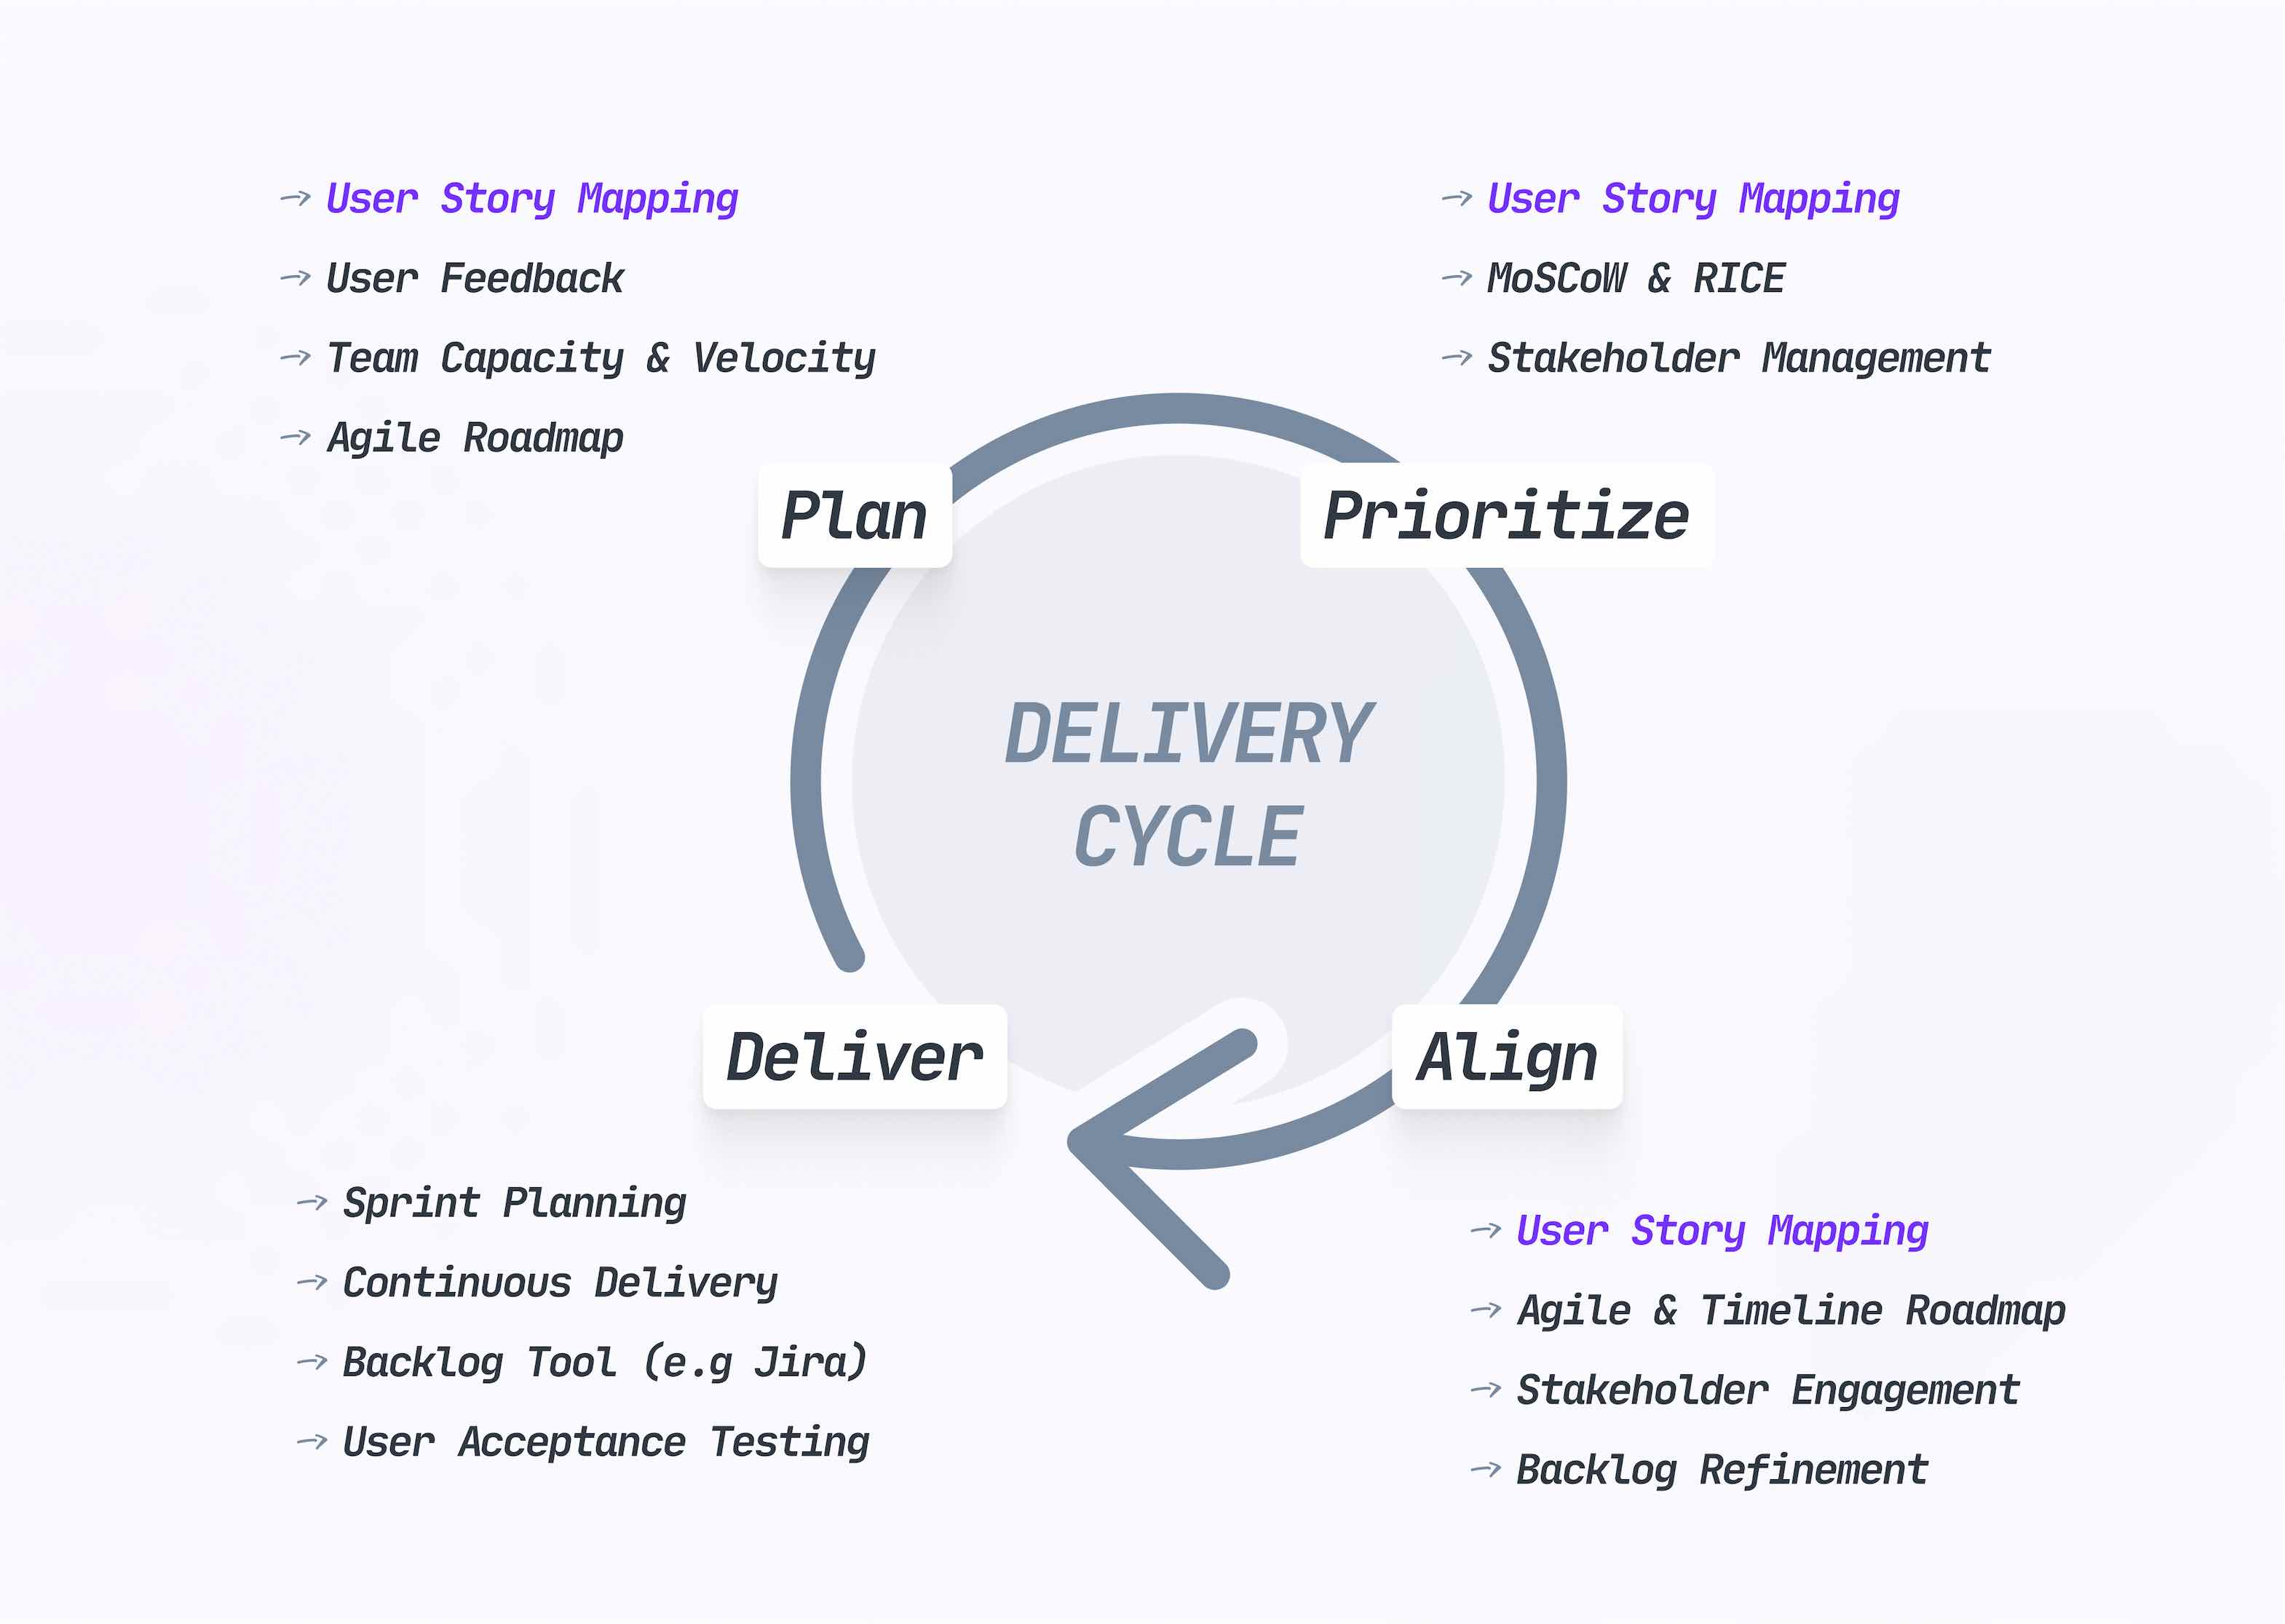 User story mapping in the development continuous delivery cycle